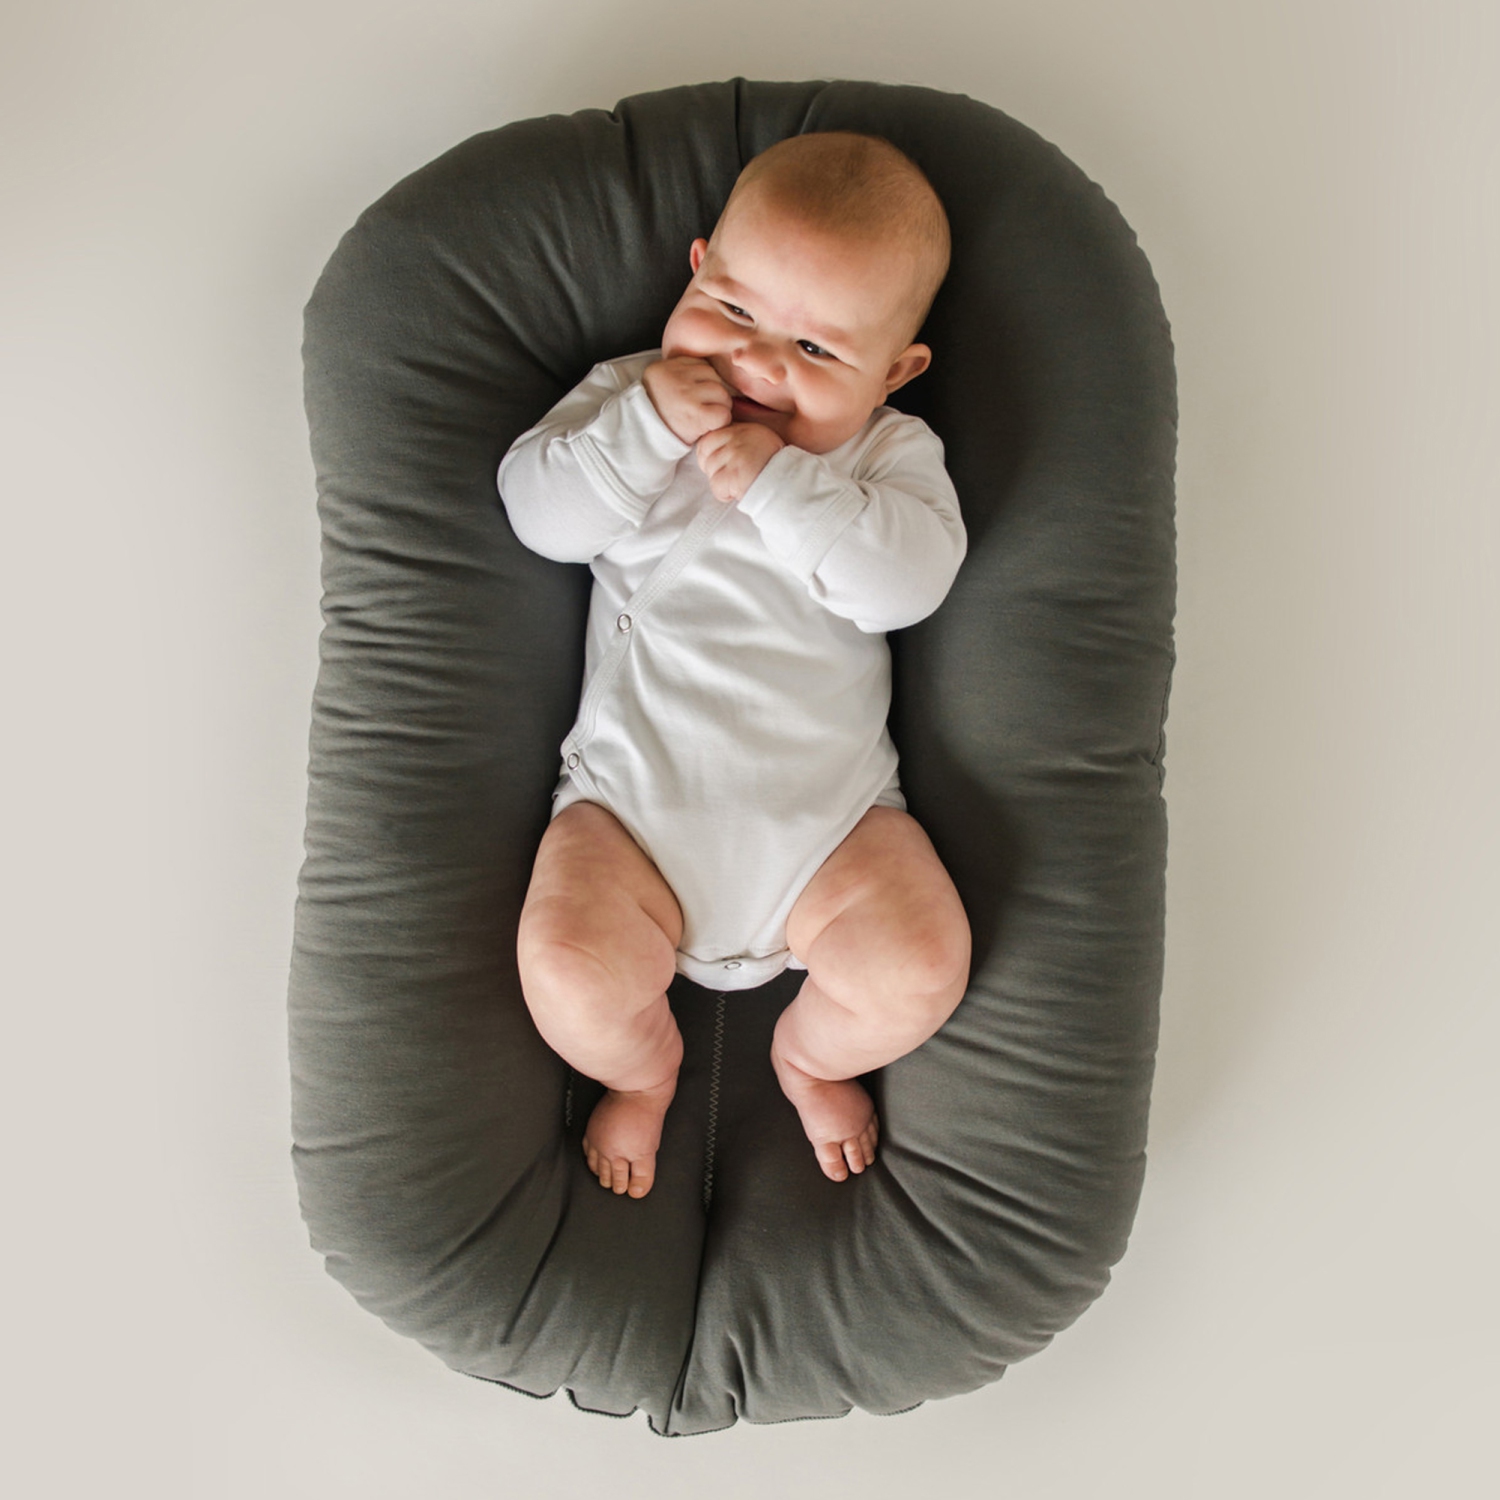 Snuggle Me Organic Infant Lounger - Sparrow